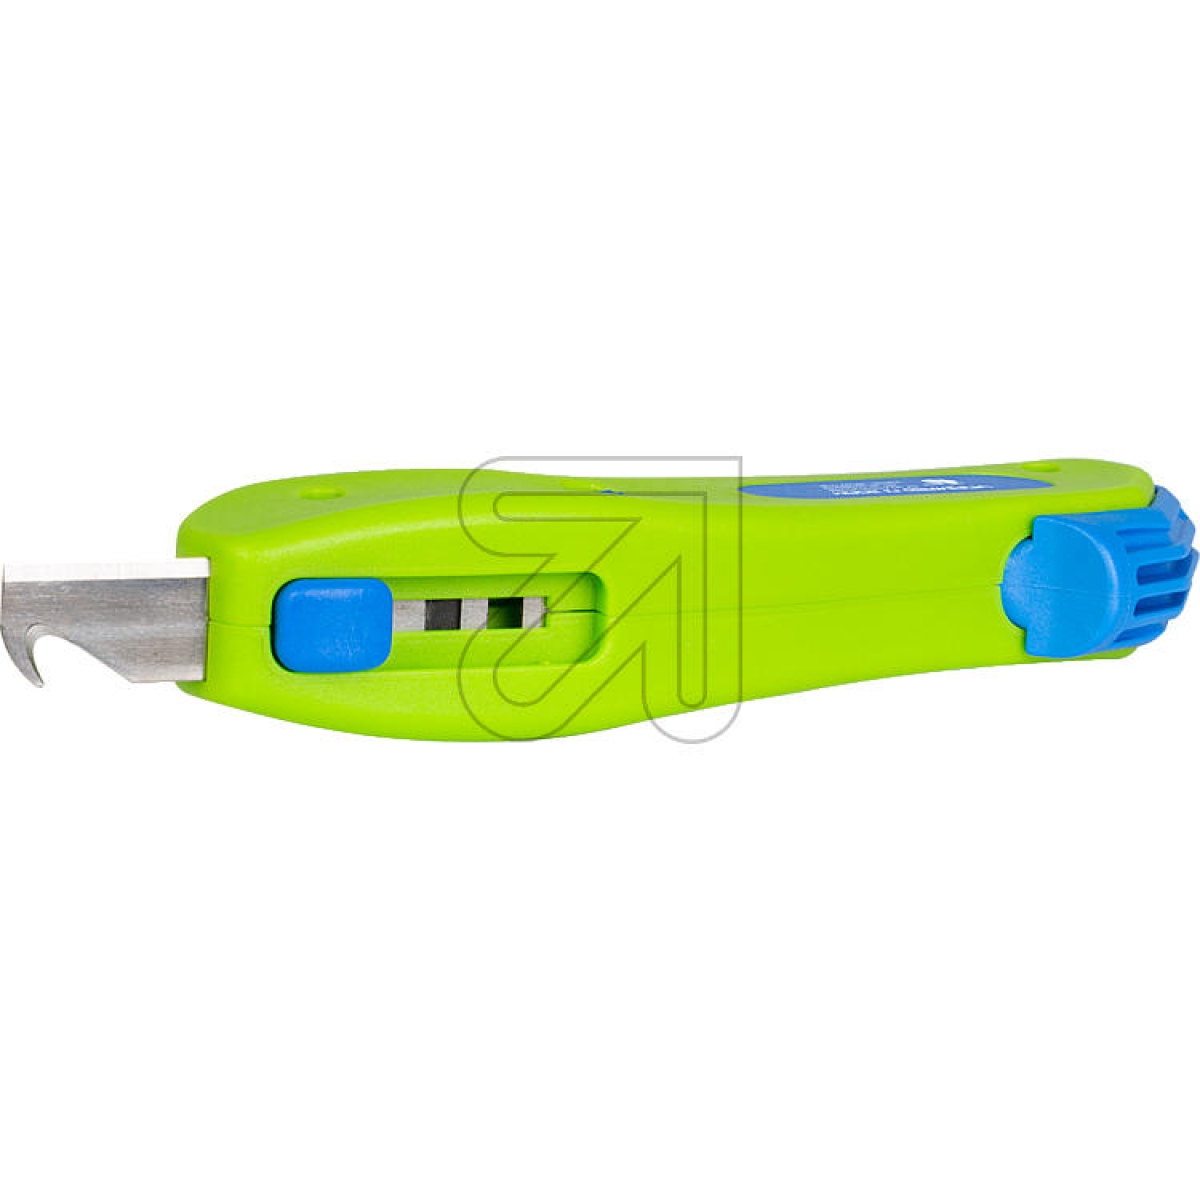 WEICONCable Knife S 4-28 Green LineArticle-No: 756260